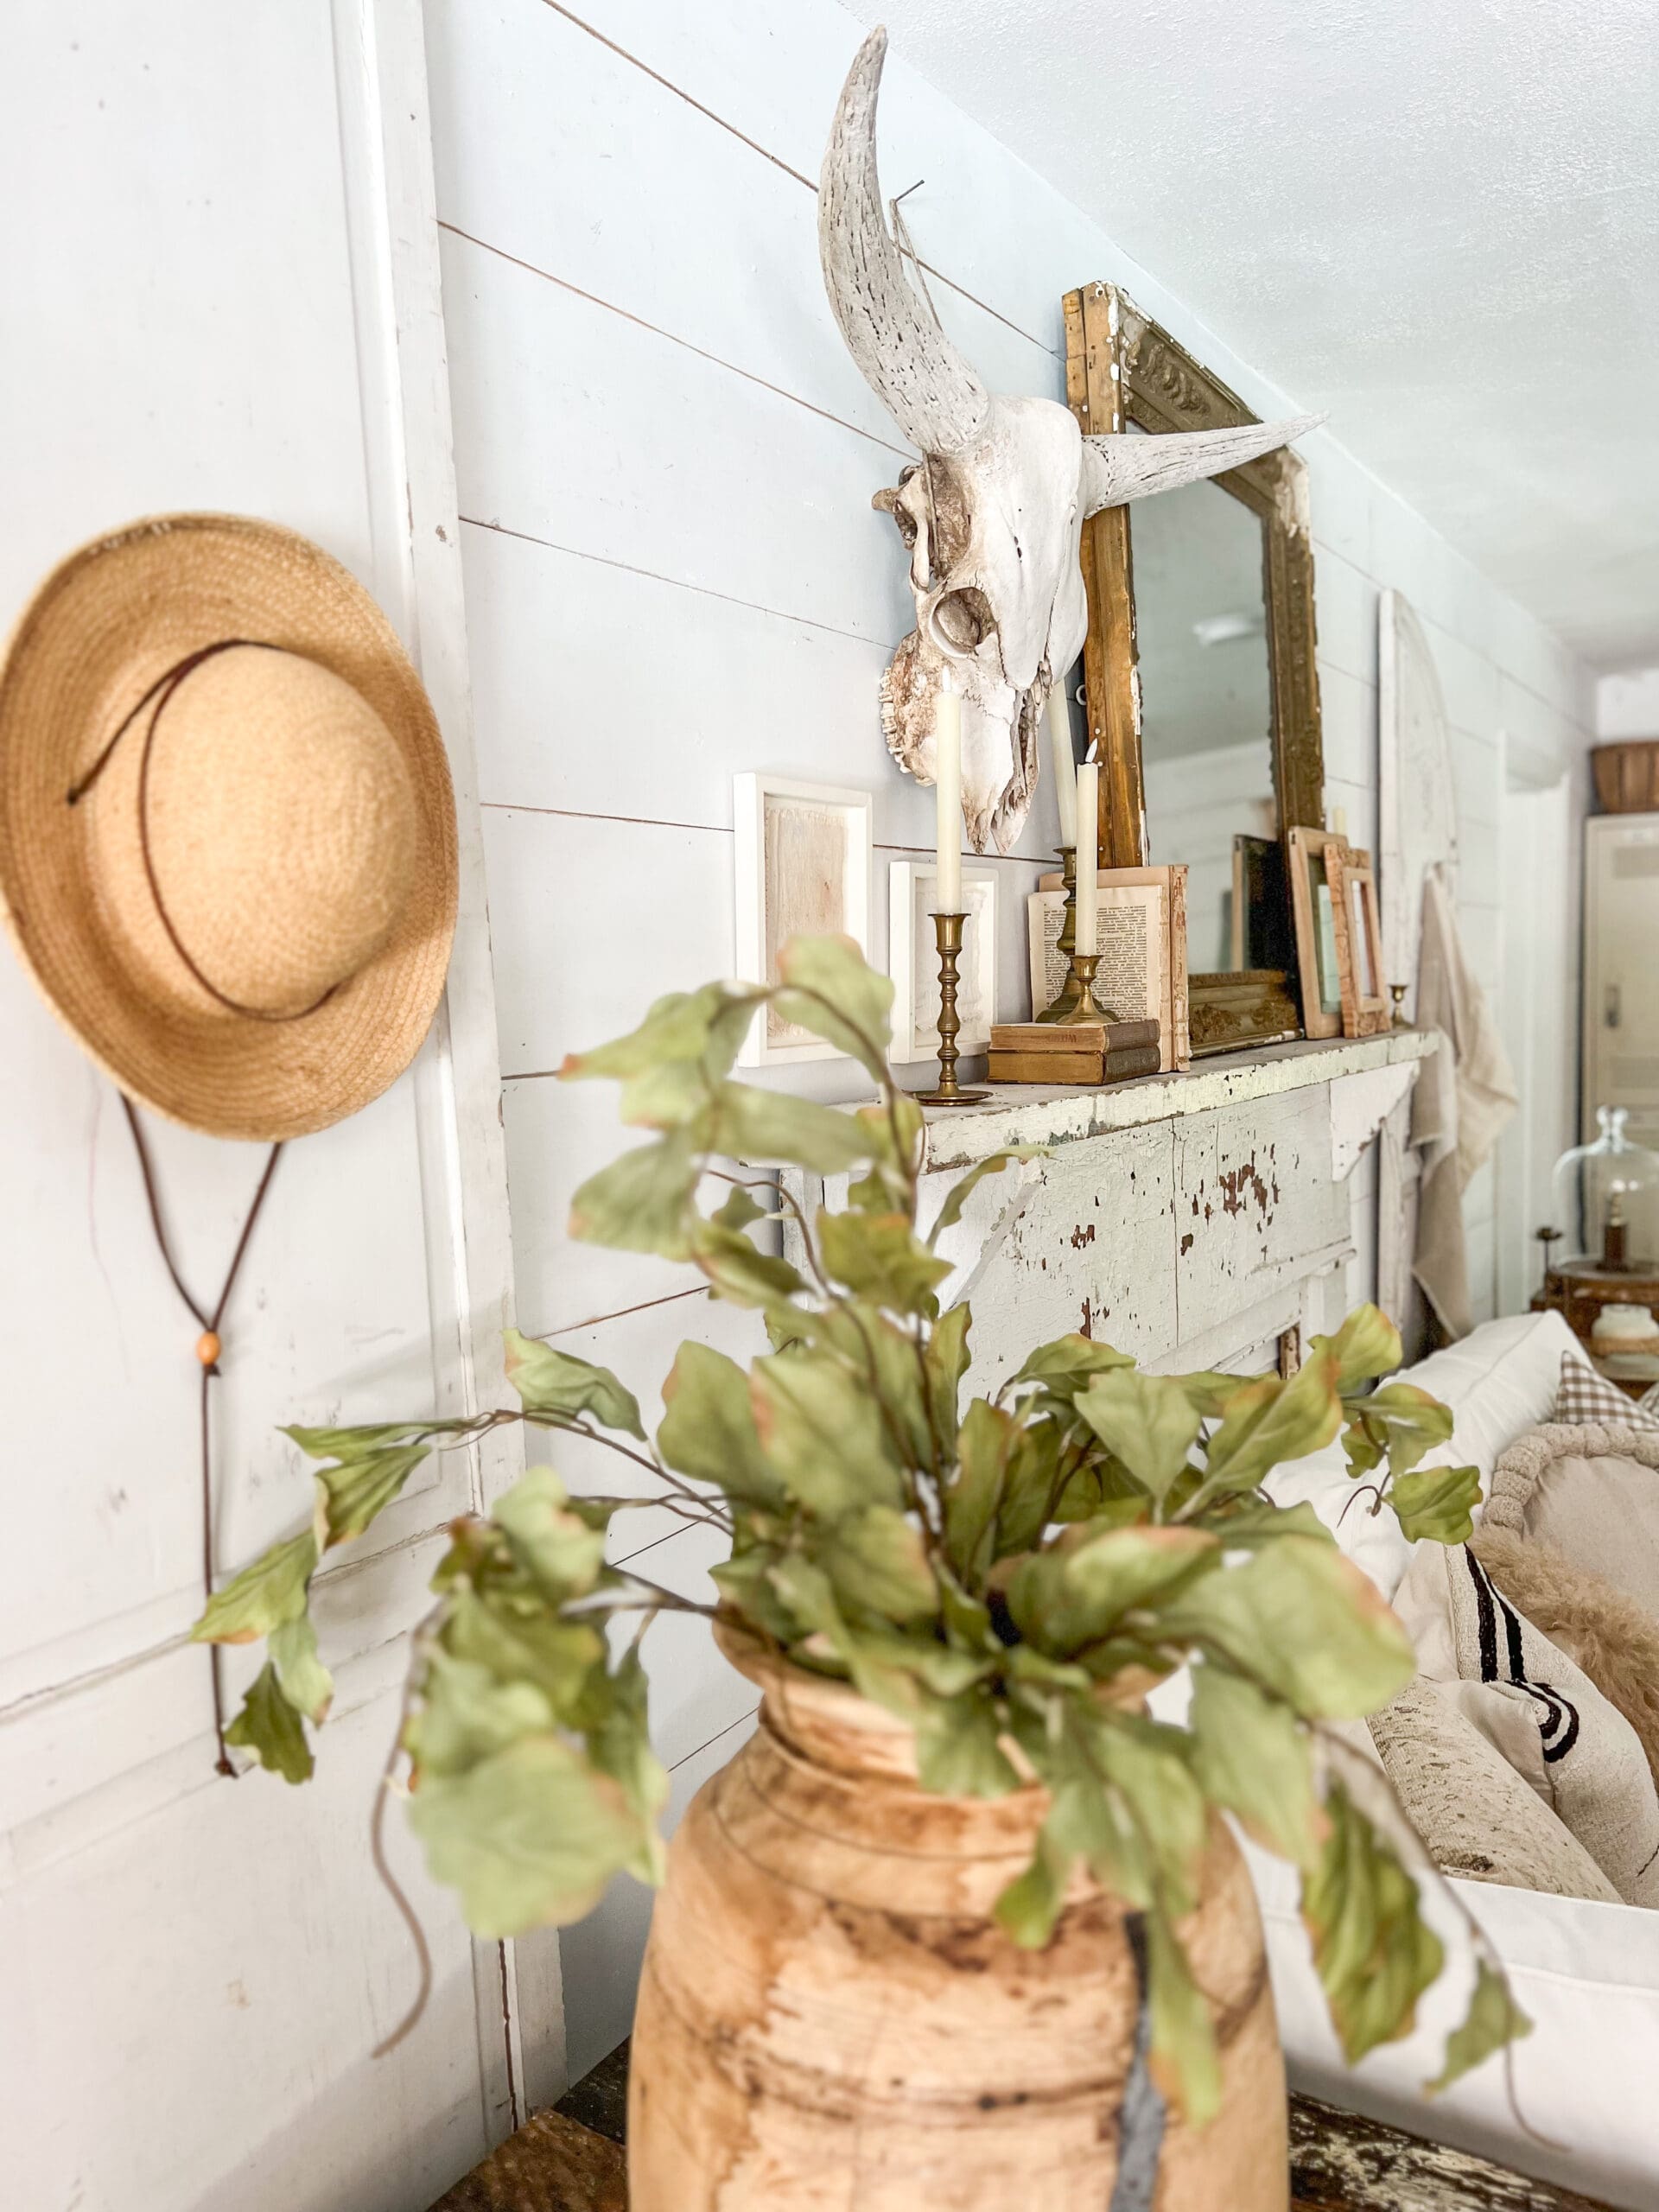 Decorating with vintage finds